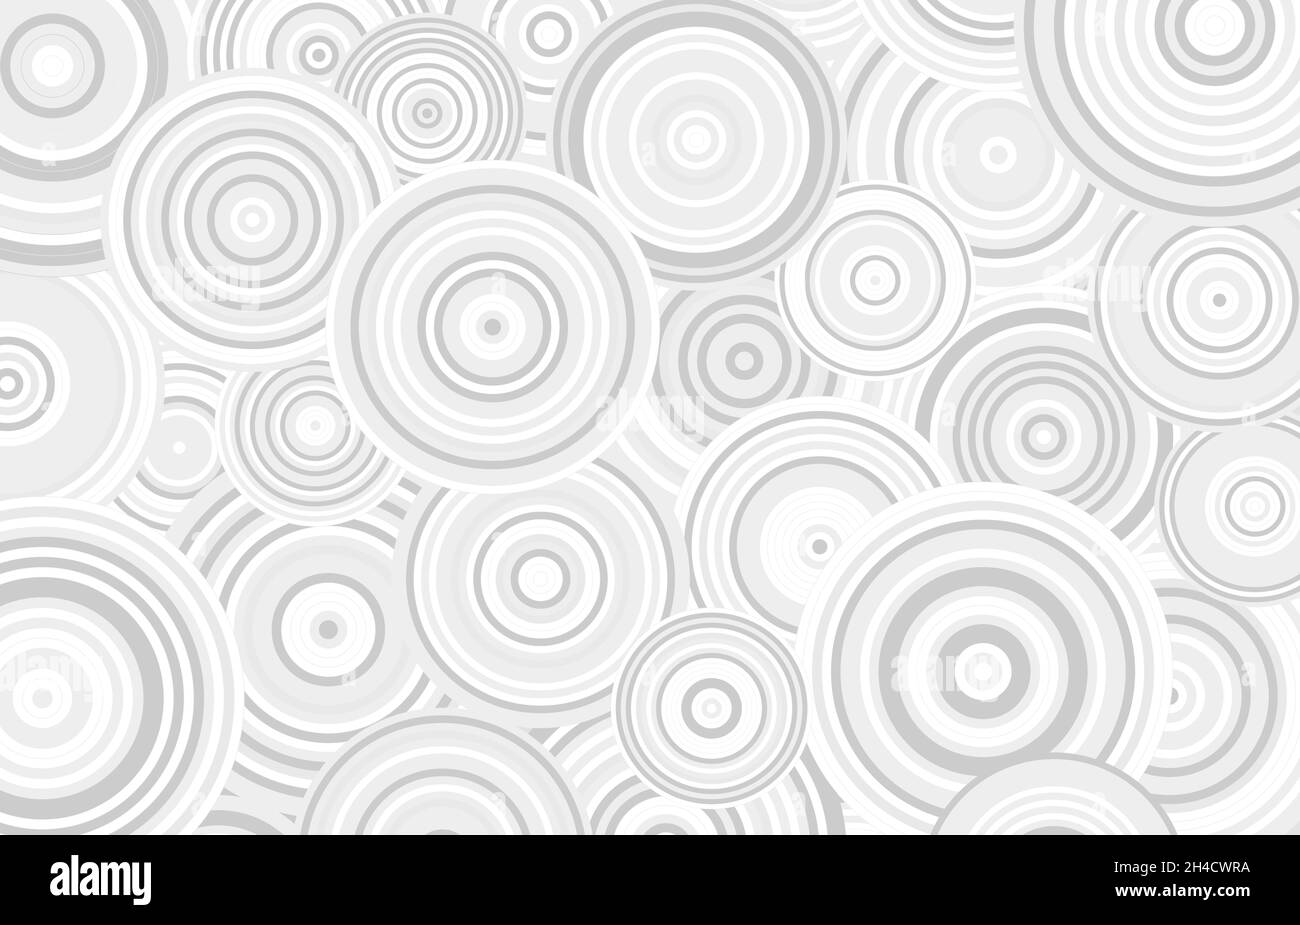 Abstract white and gray circles pattern design. Overlapping artwork template decorative background. illustration vector Stock Vector